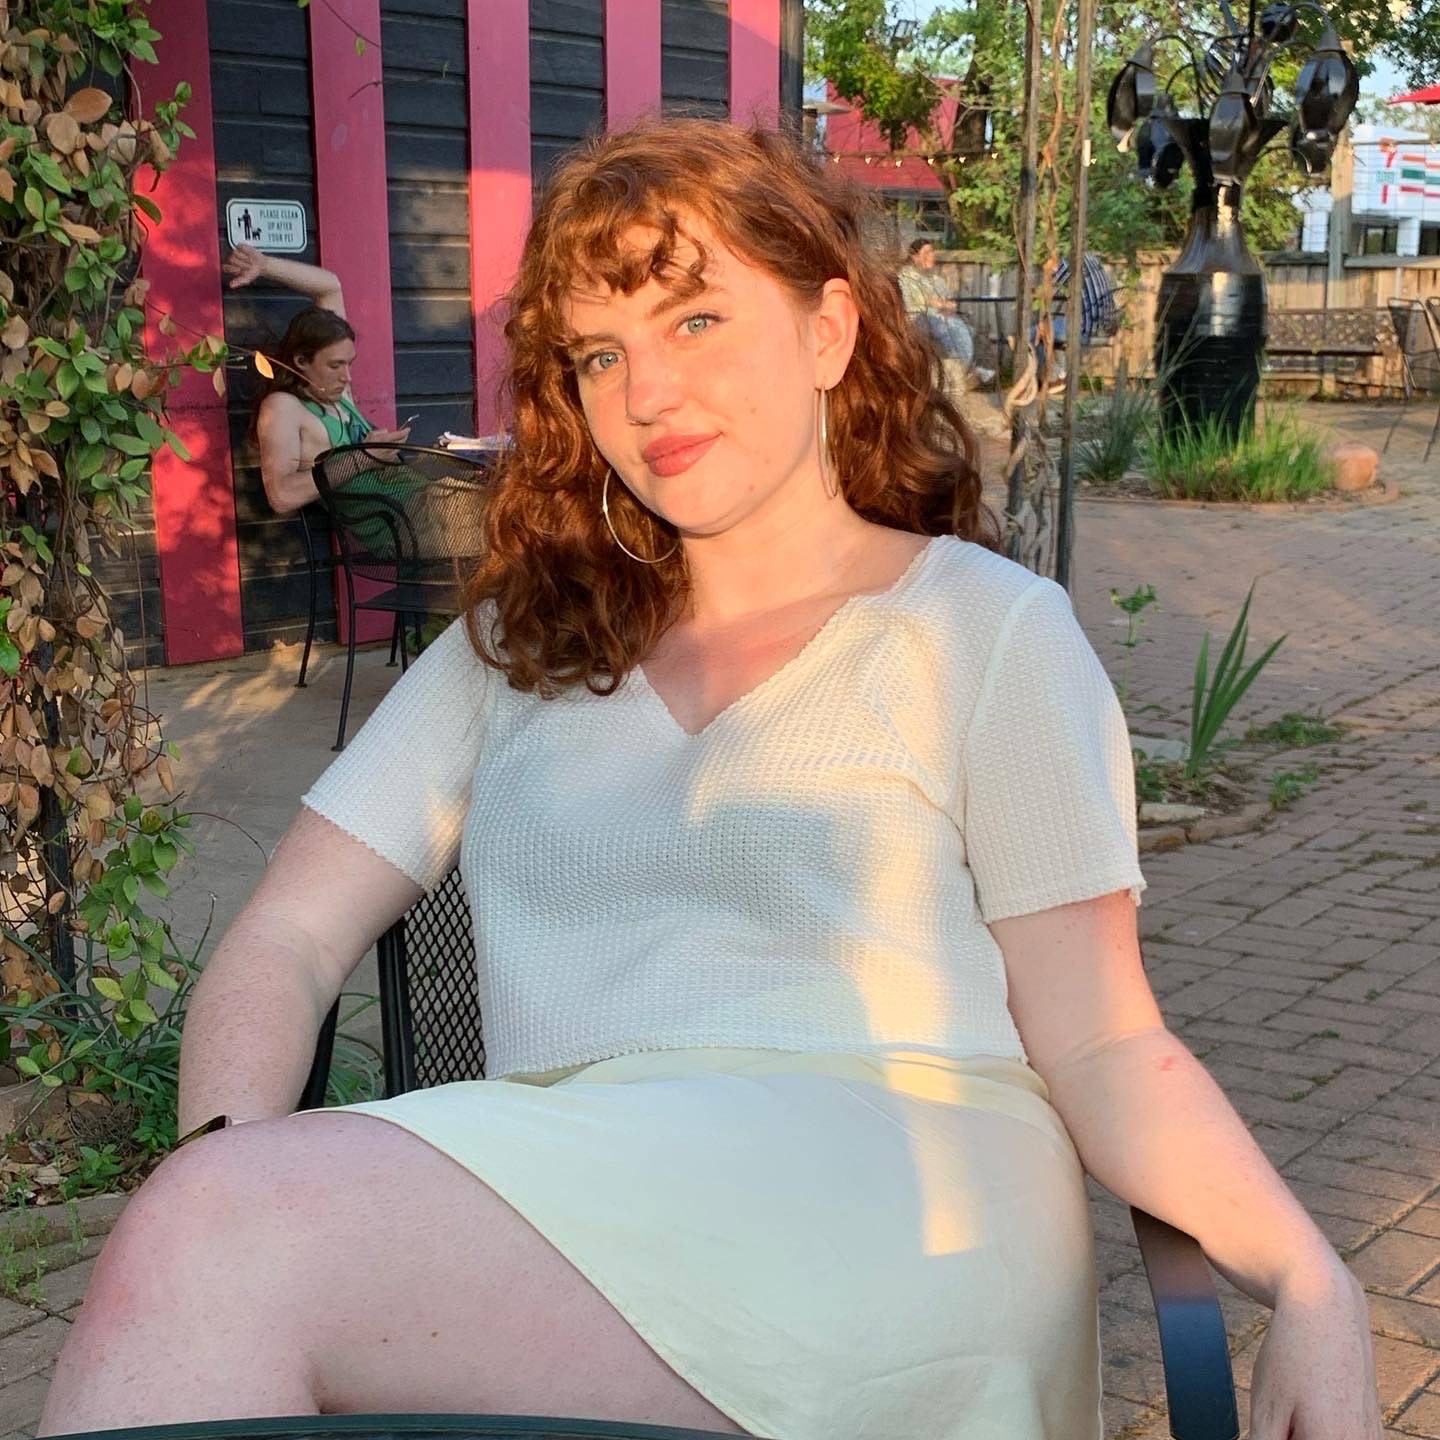 woman sitting on chair at outdoor café